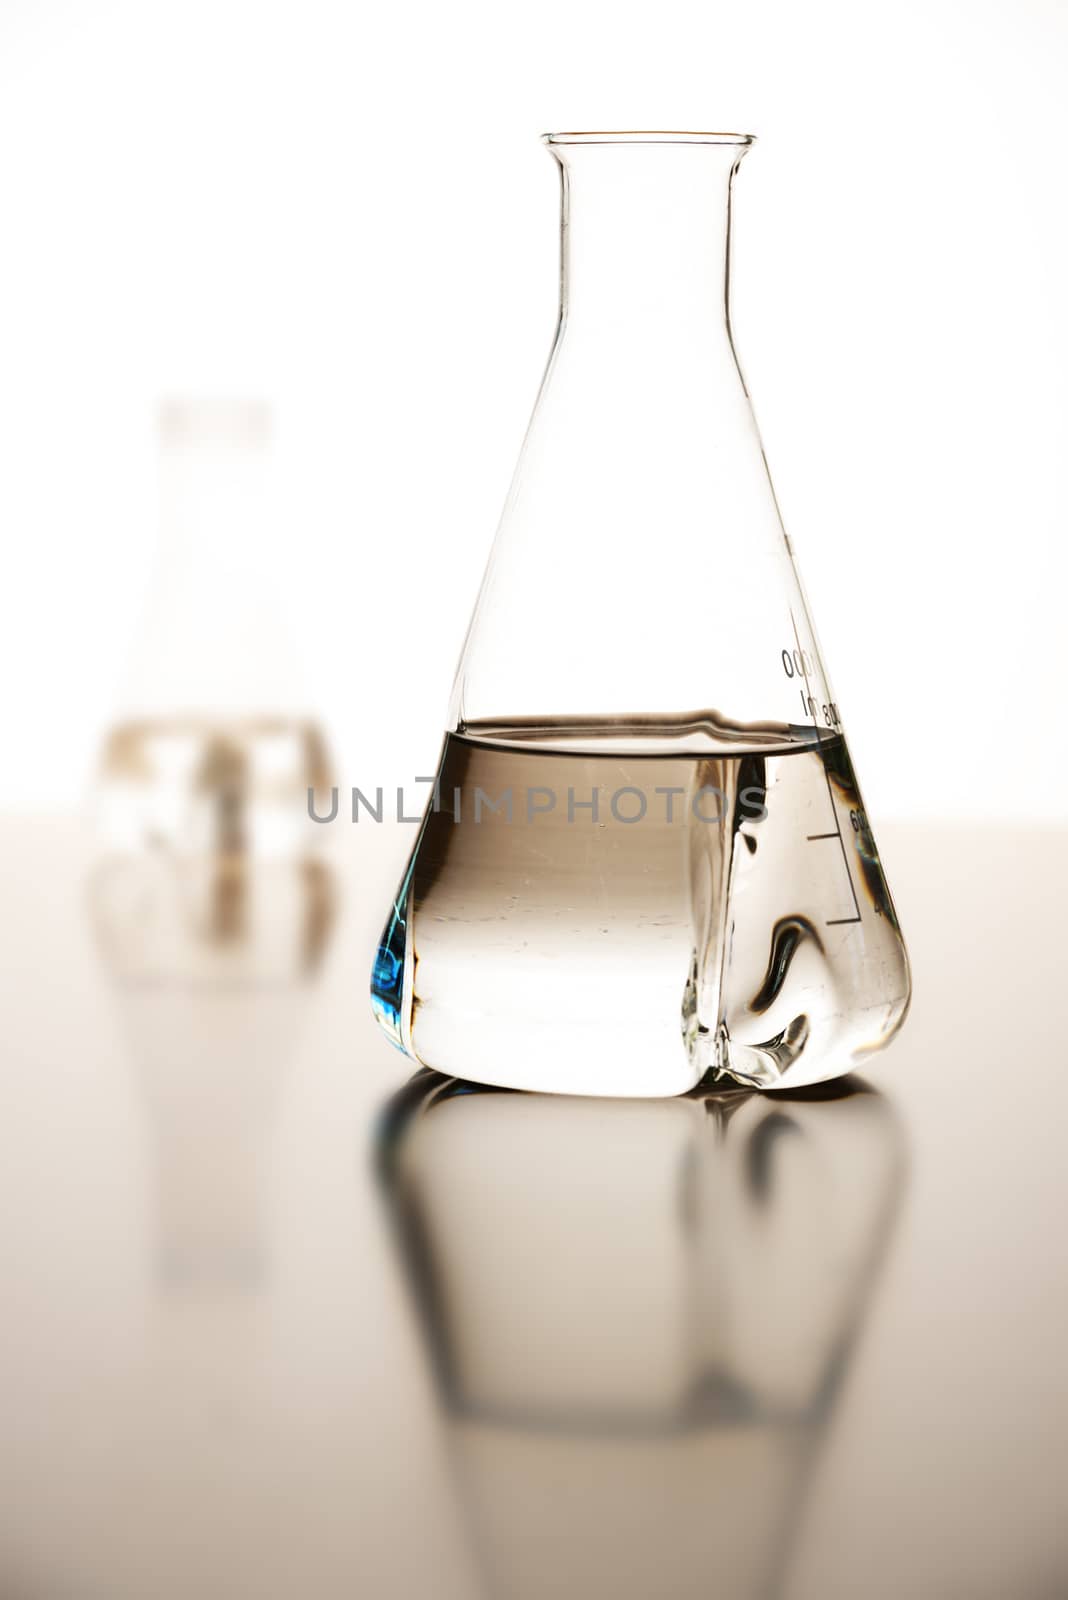 Measuring glasses on a table of a chemical laboratory